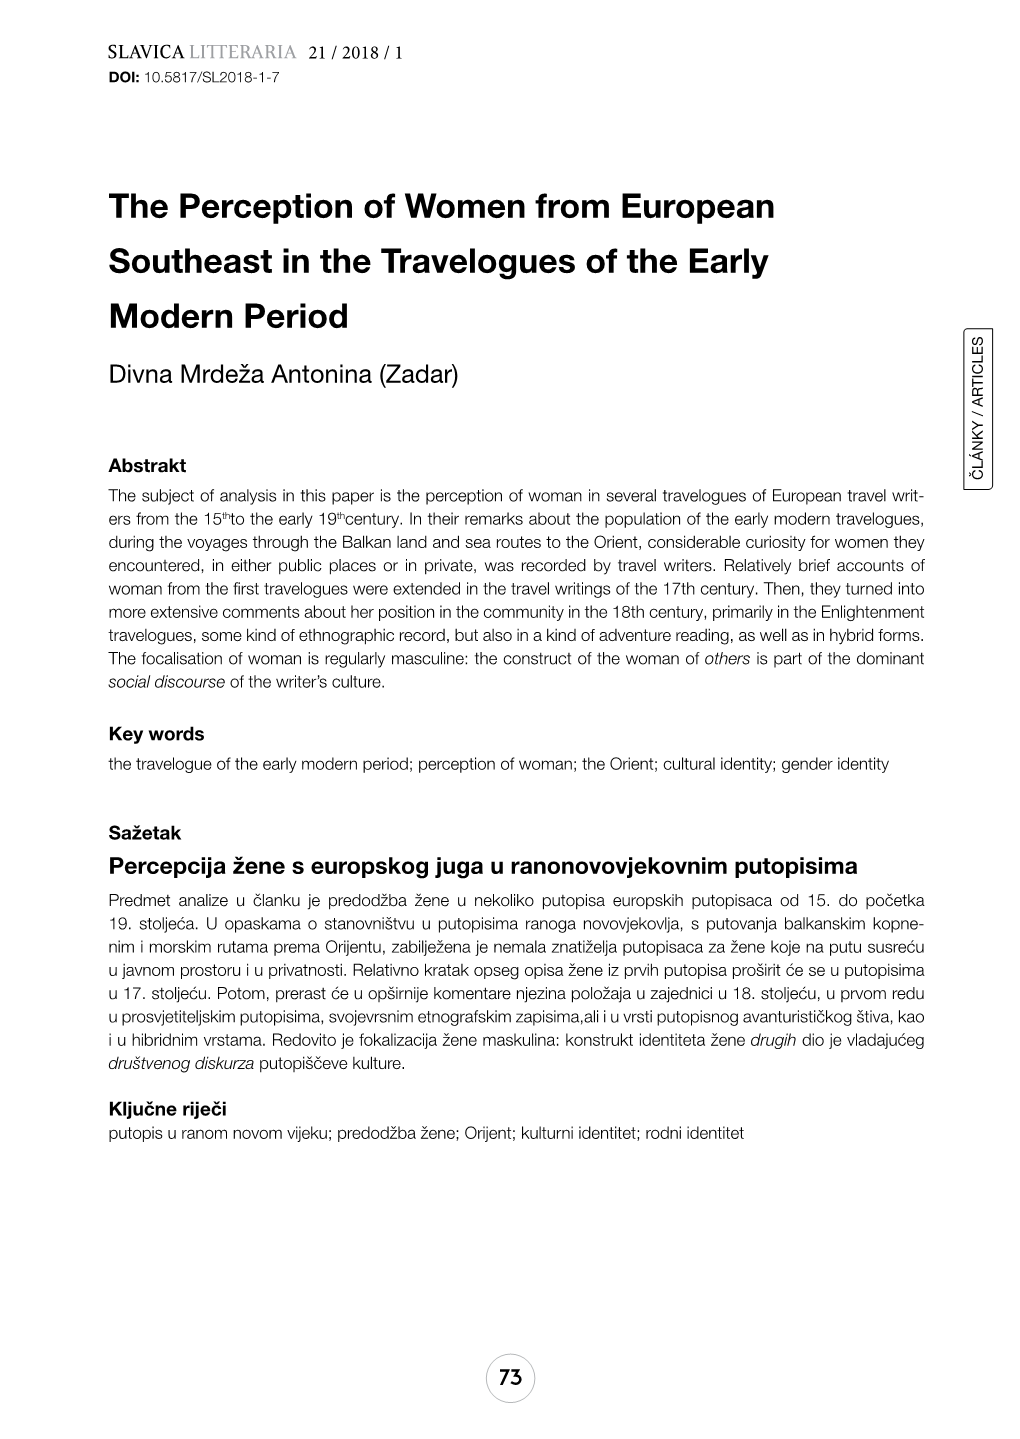 The Perception of Women from European Southeast in the Travelogues of the Early Modern Period